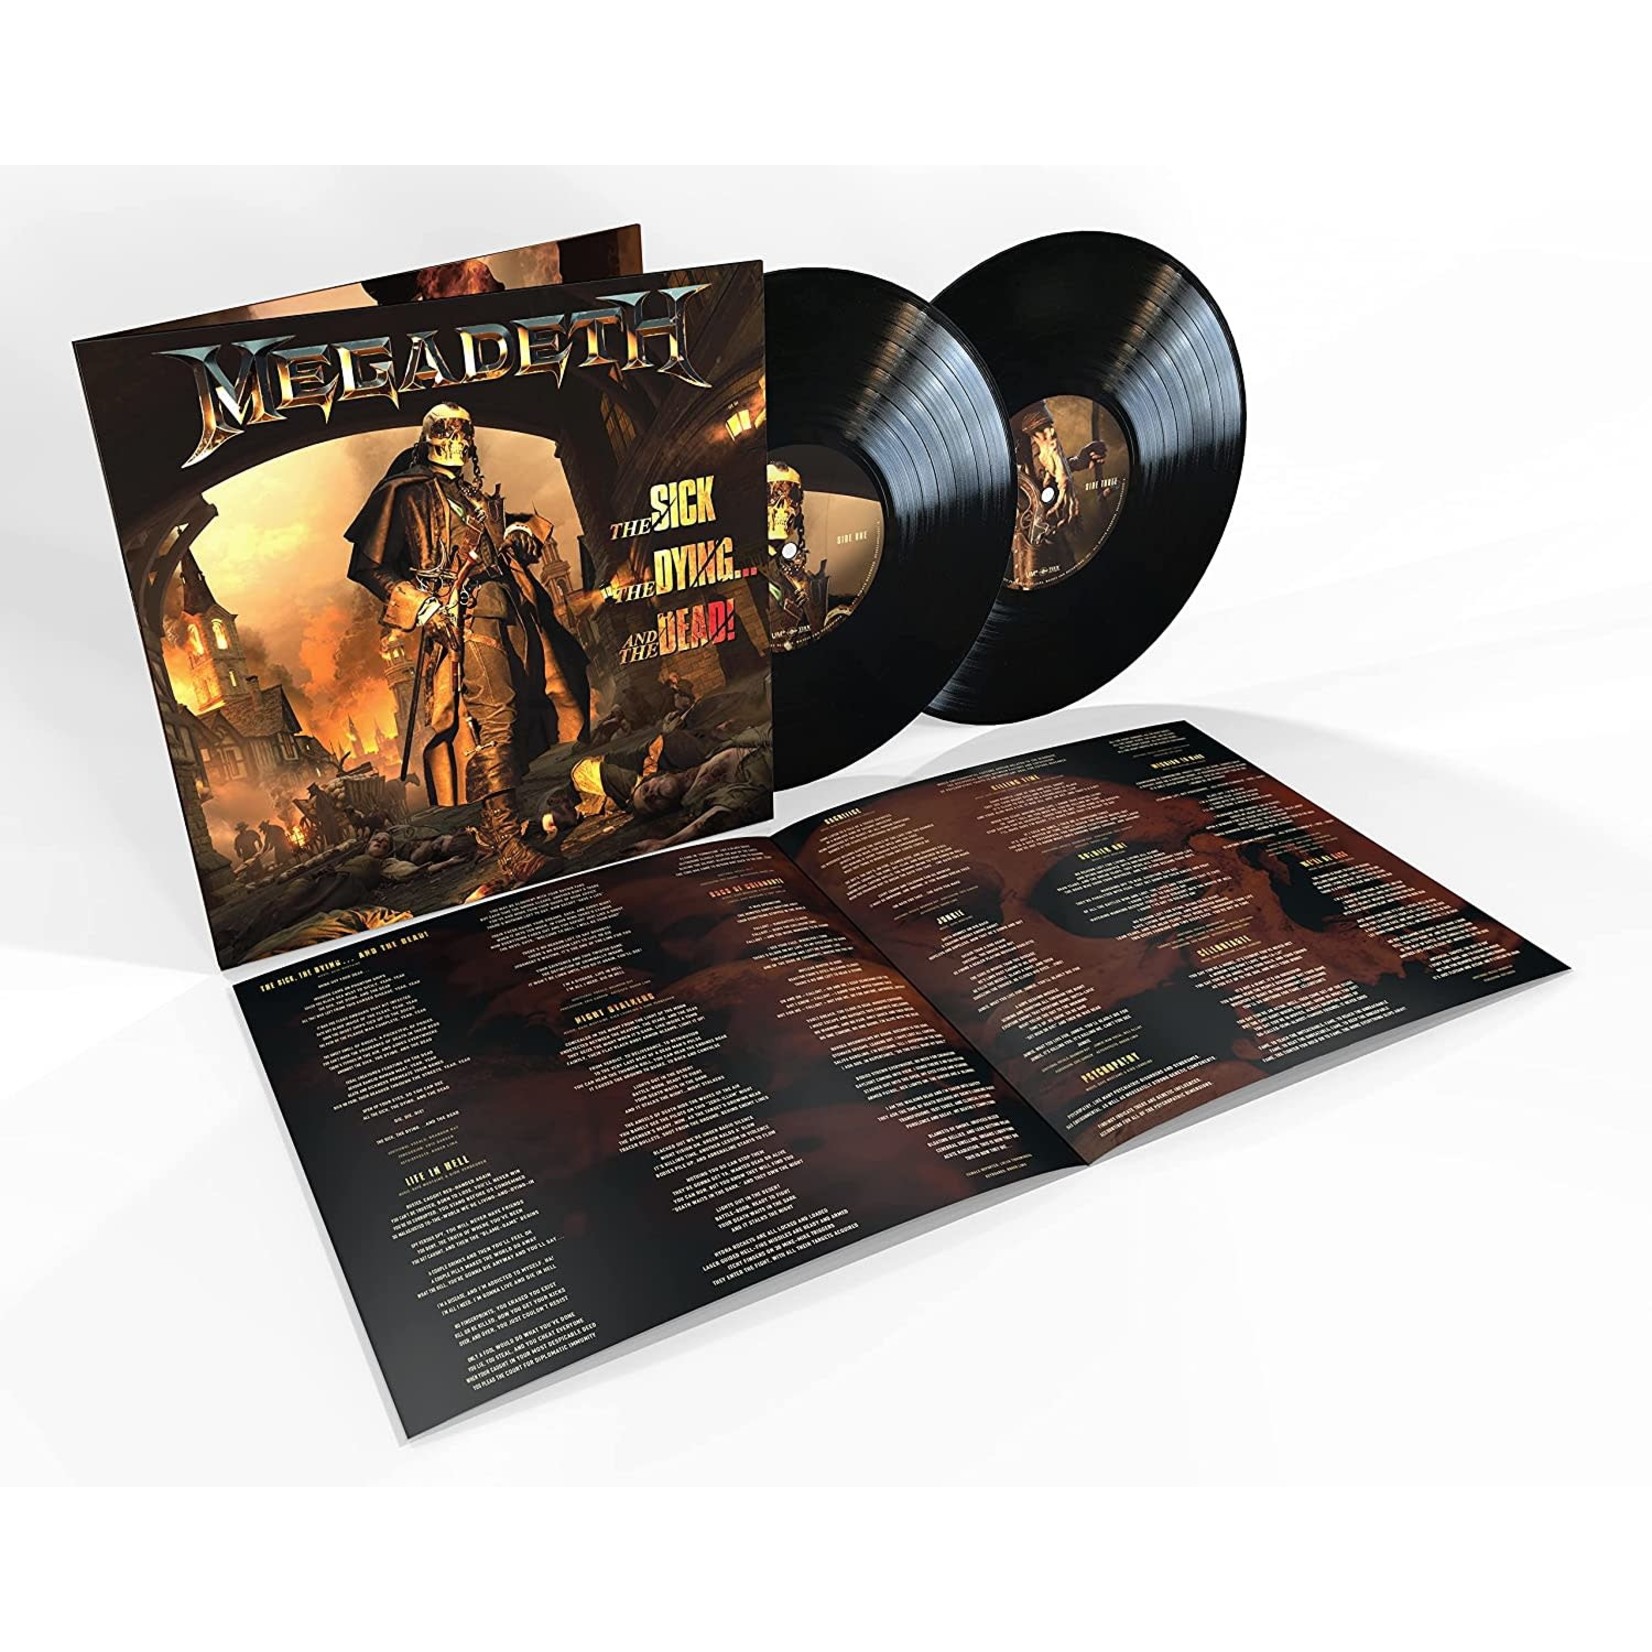 Megadeth - The Sick, The Dying...And The Dead! [2LP]